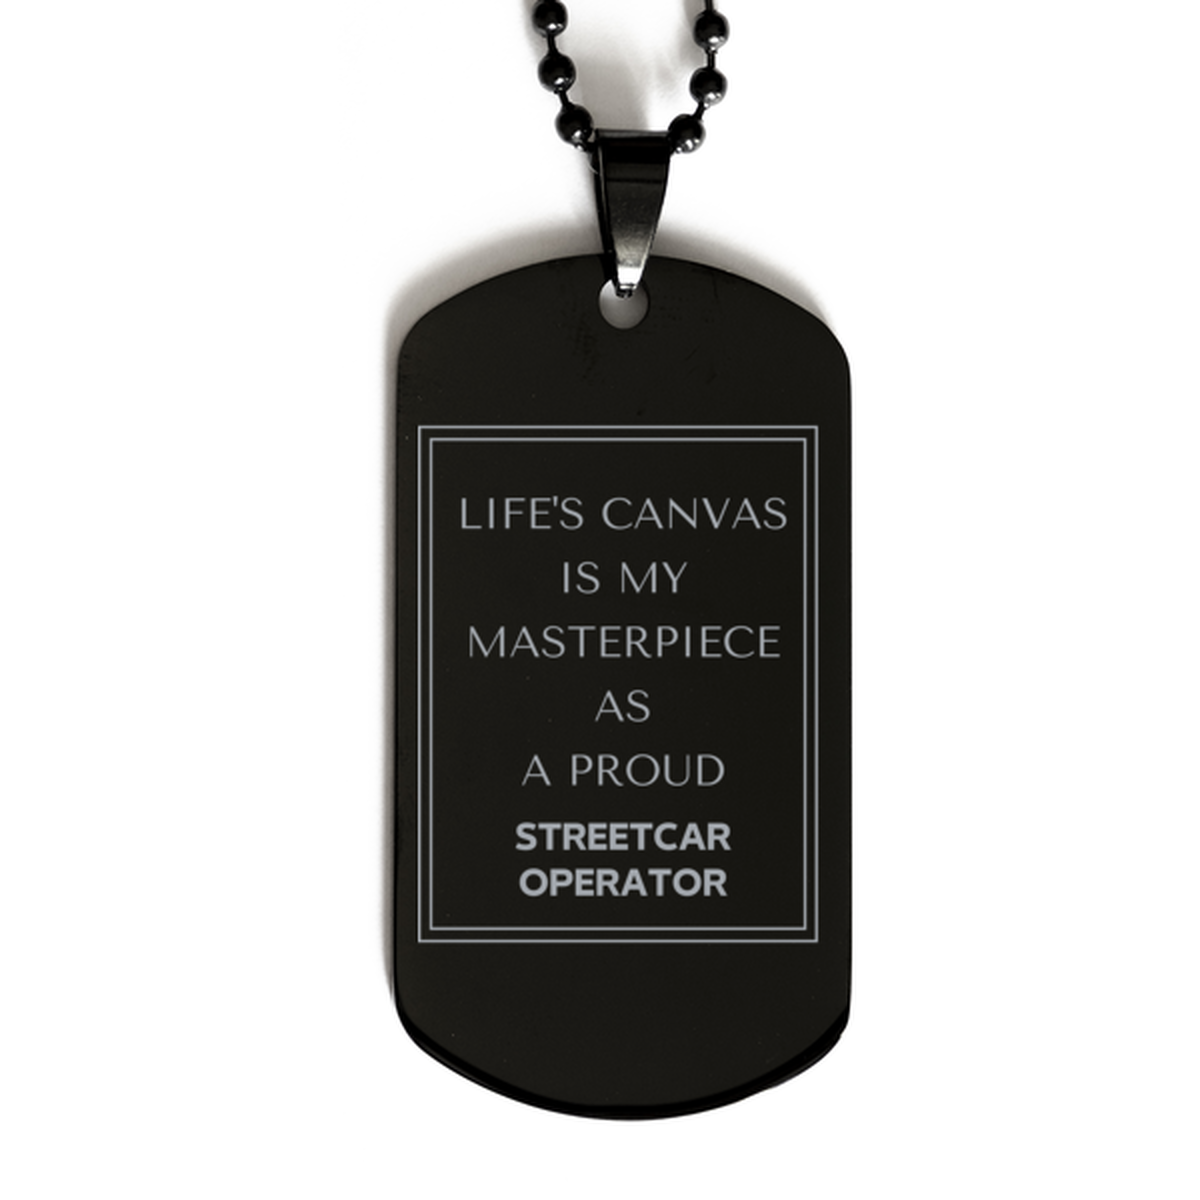 Proud Streetcar Operator Gifts, Life's canvas is my masterpiece, Epic Birthday Christmas Unique Black Dog Tag For Streetcar Operator, Coworkers, Men, Women, Friends